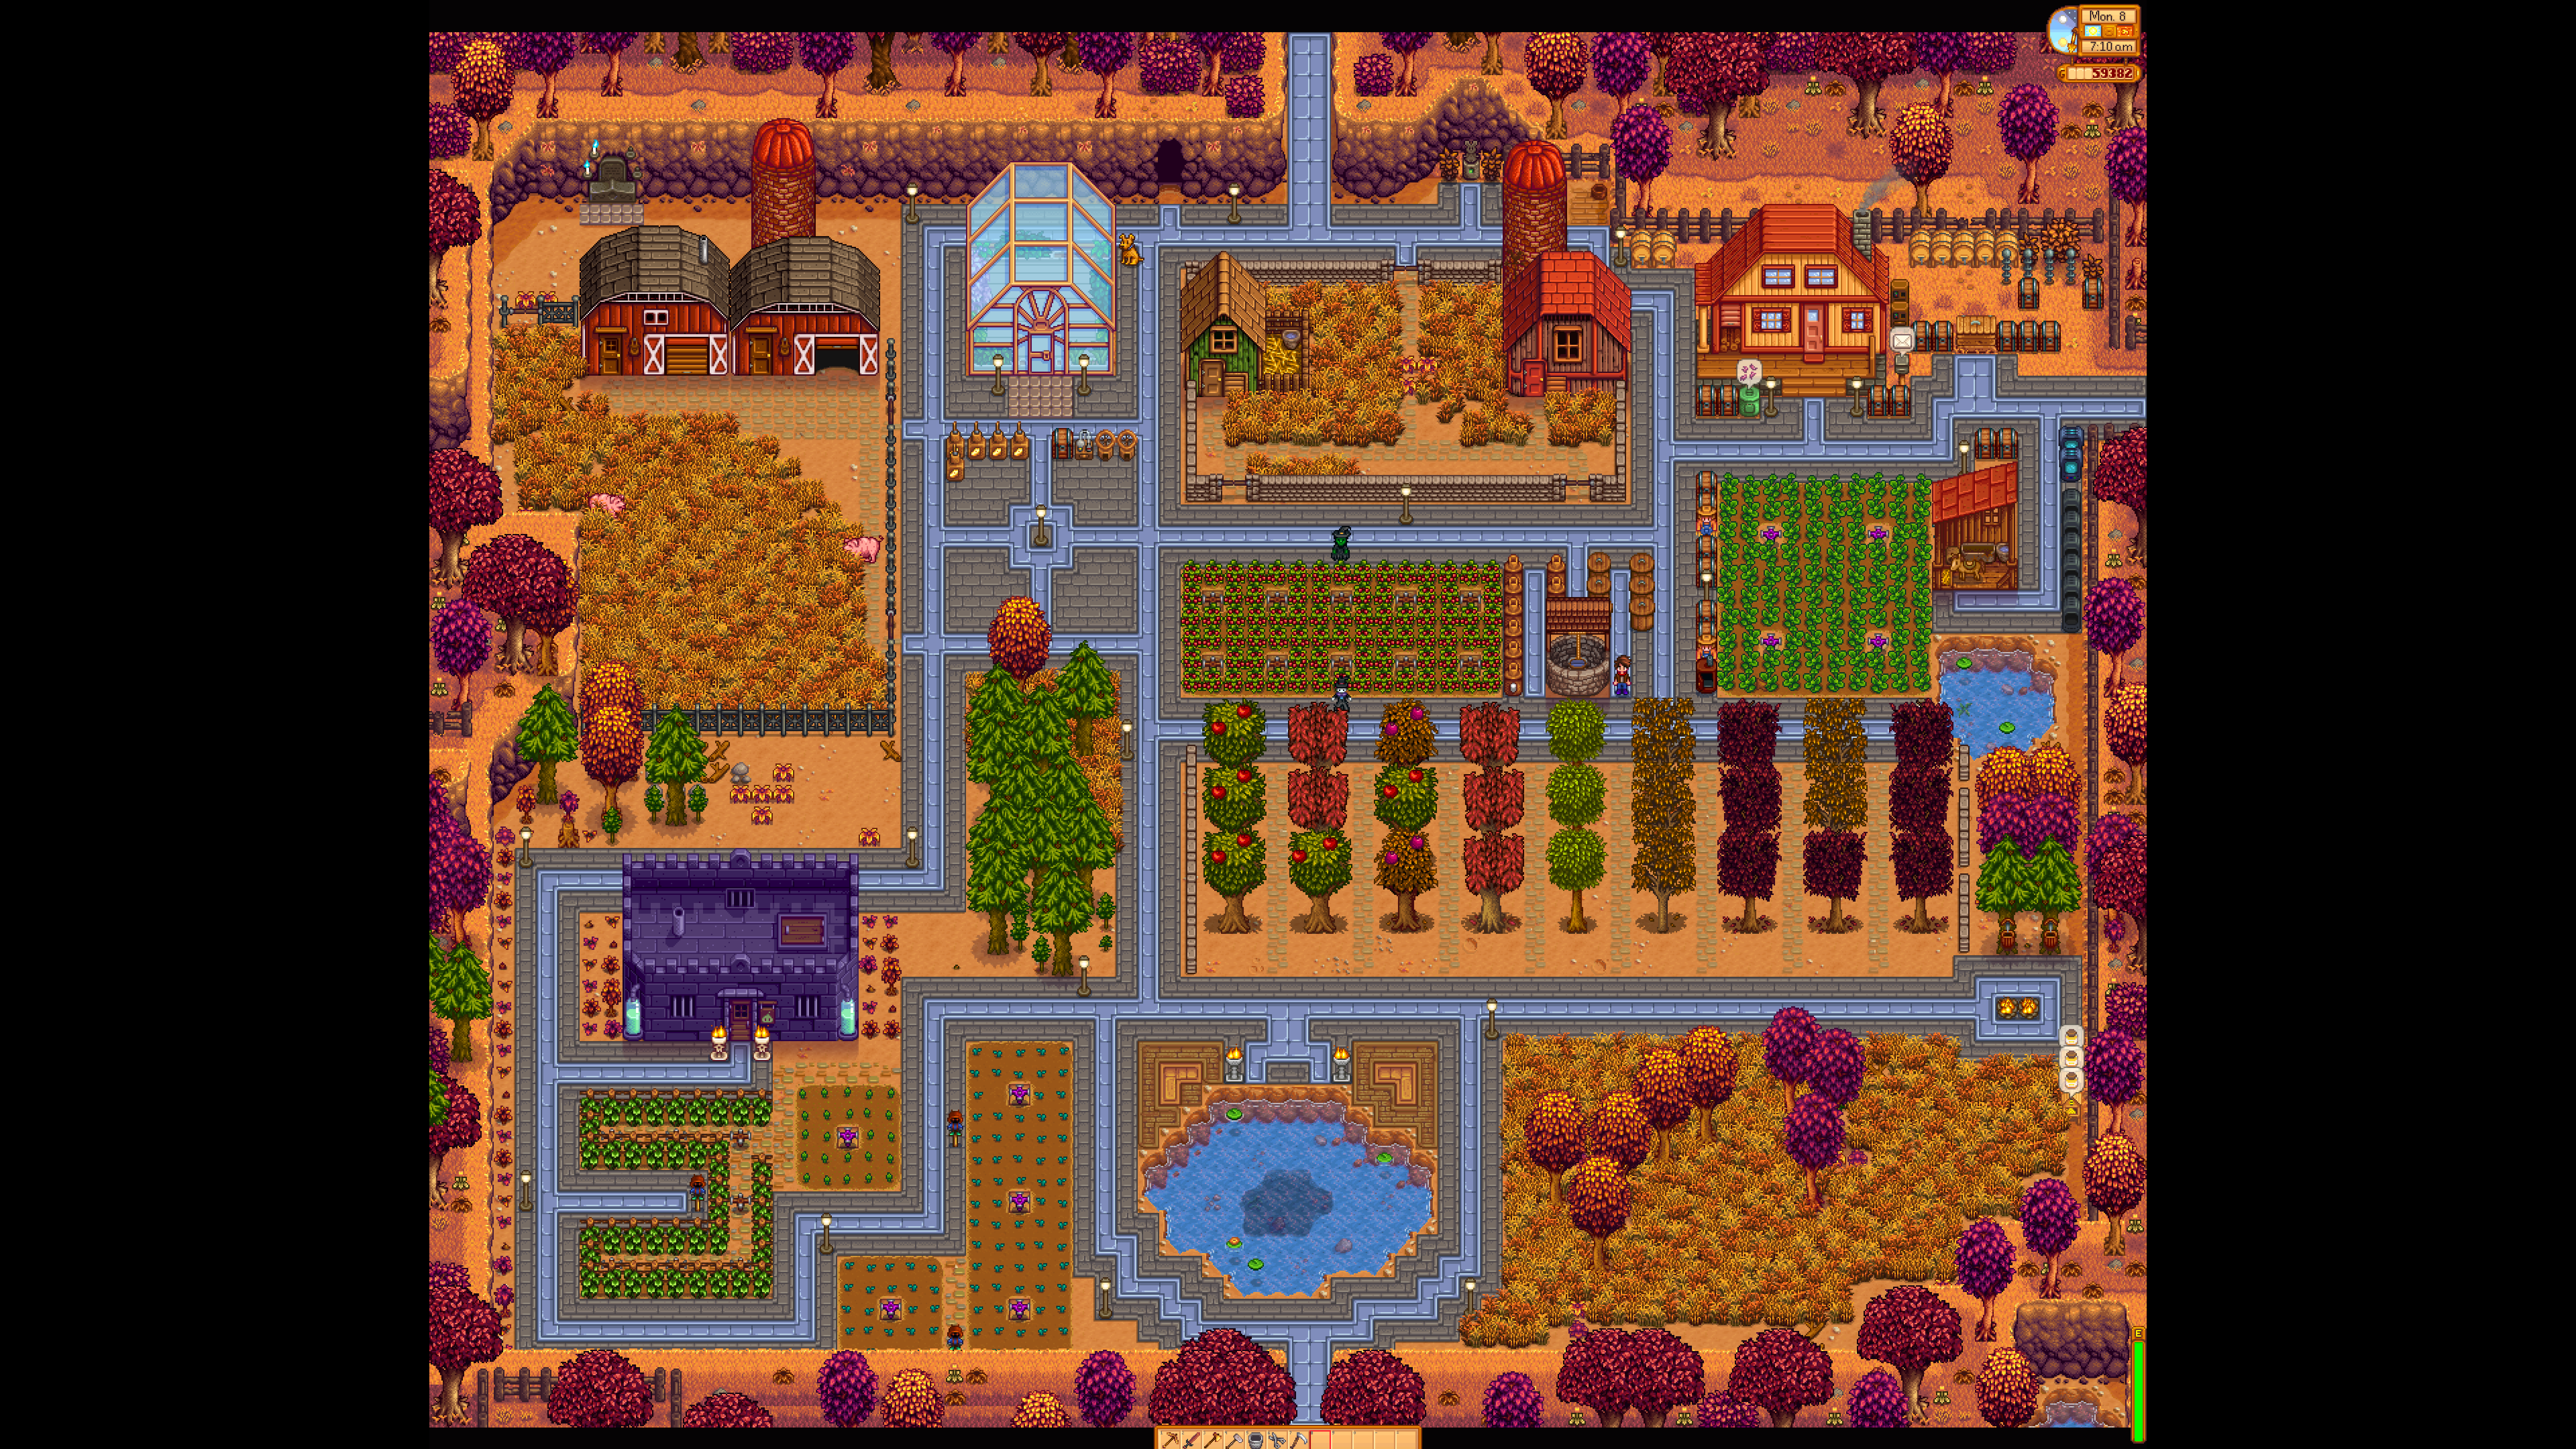 Stardew valley: every golden walnut location and how to get them